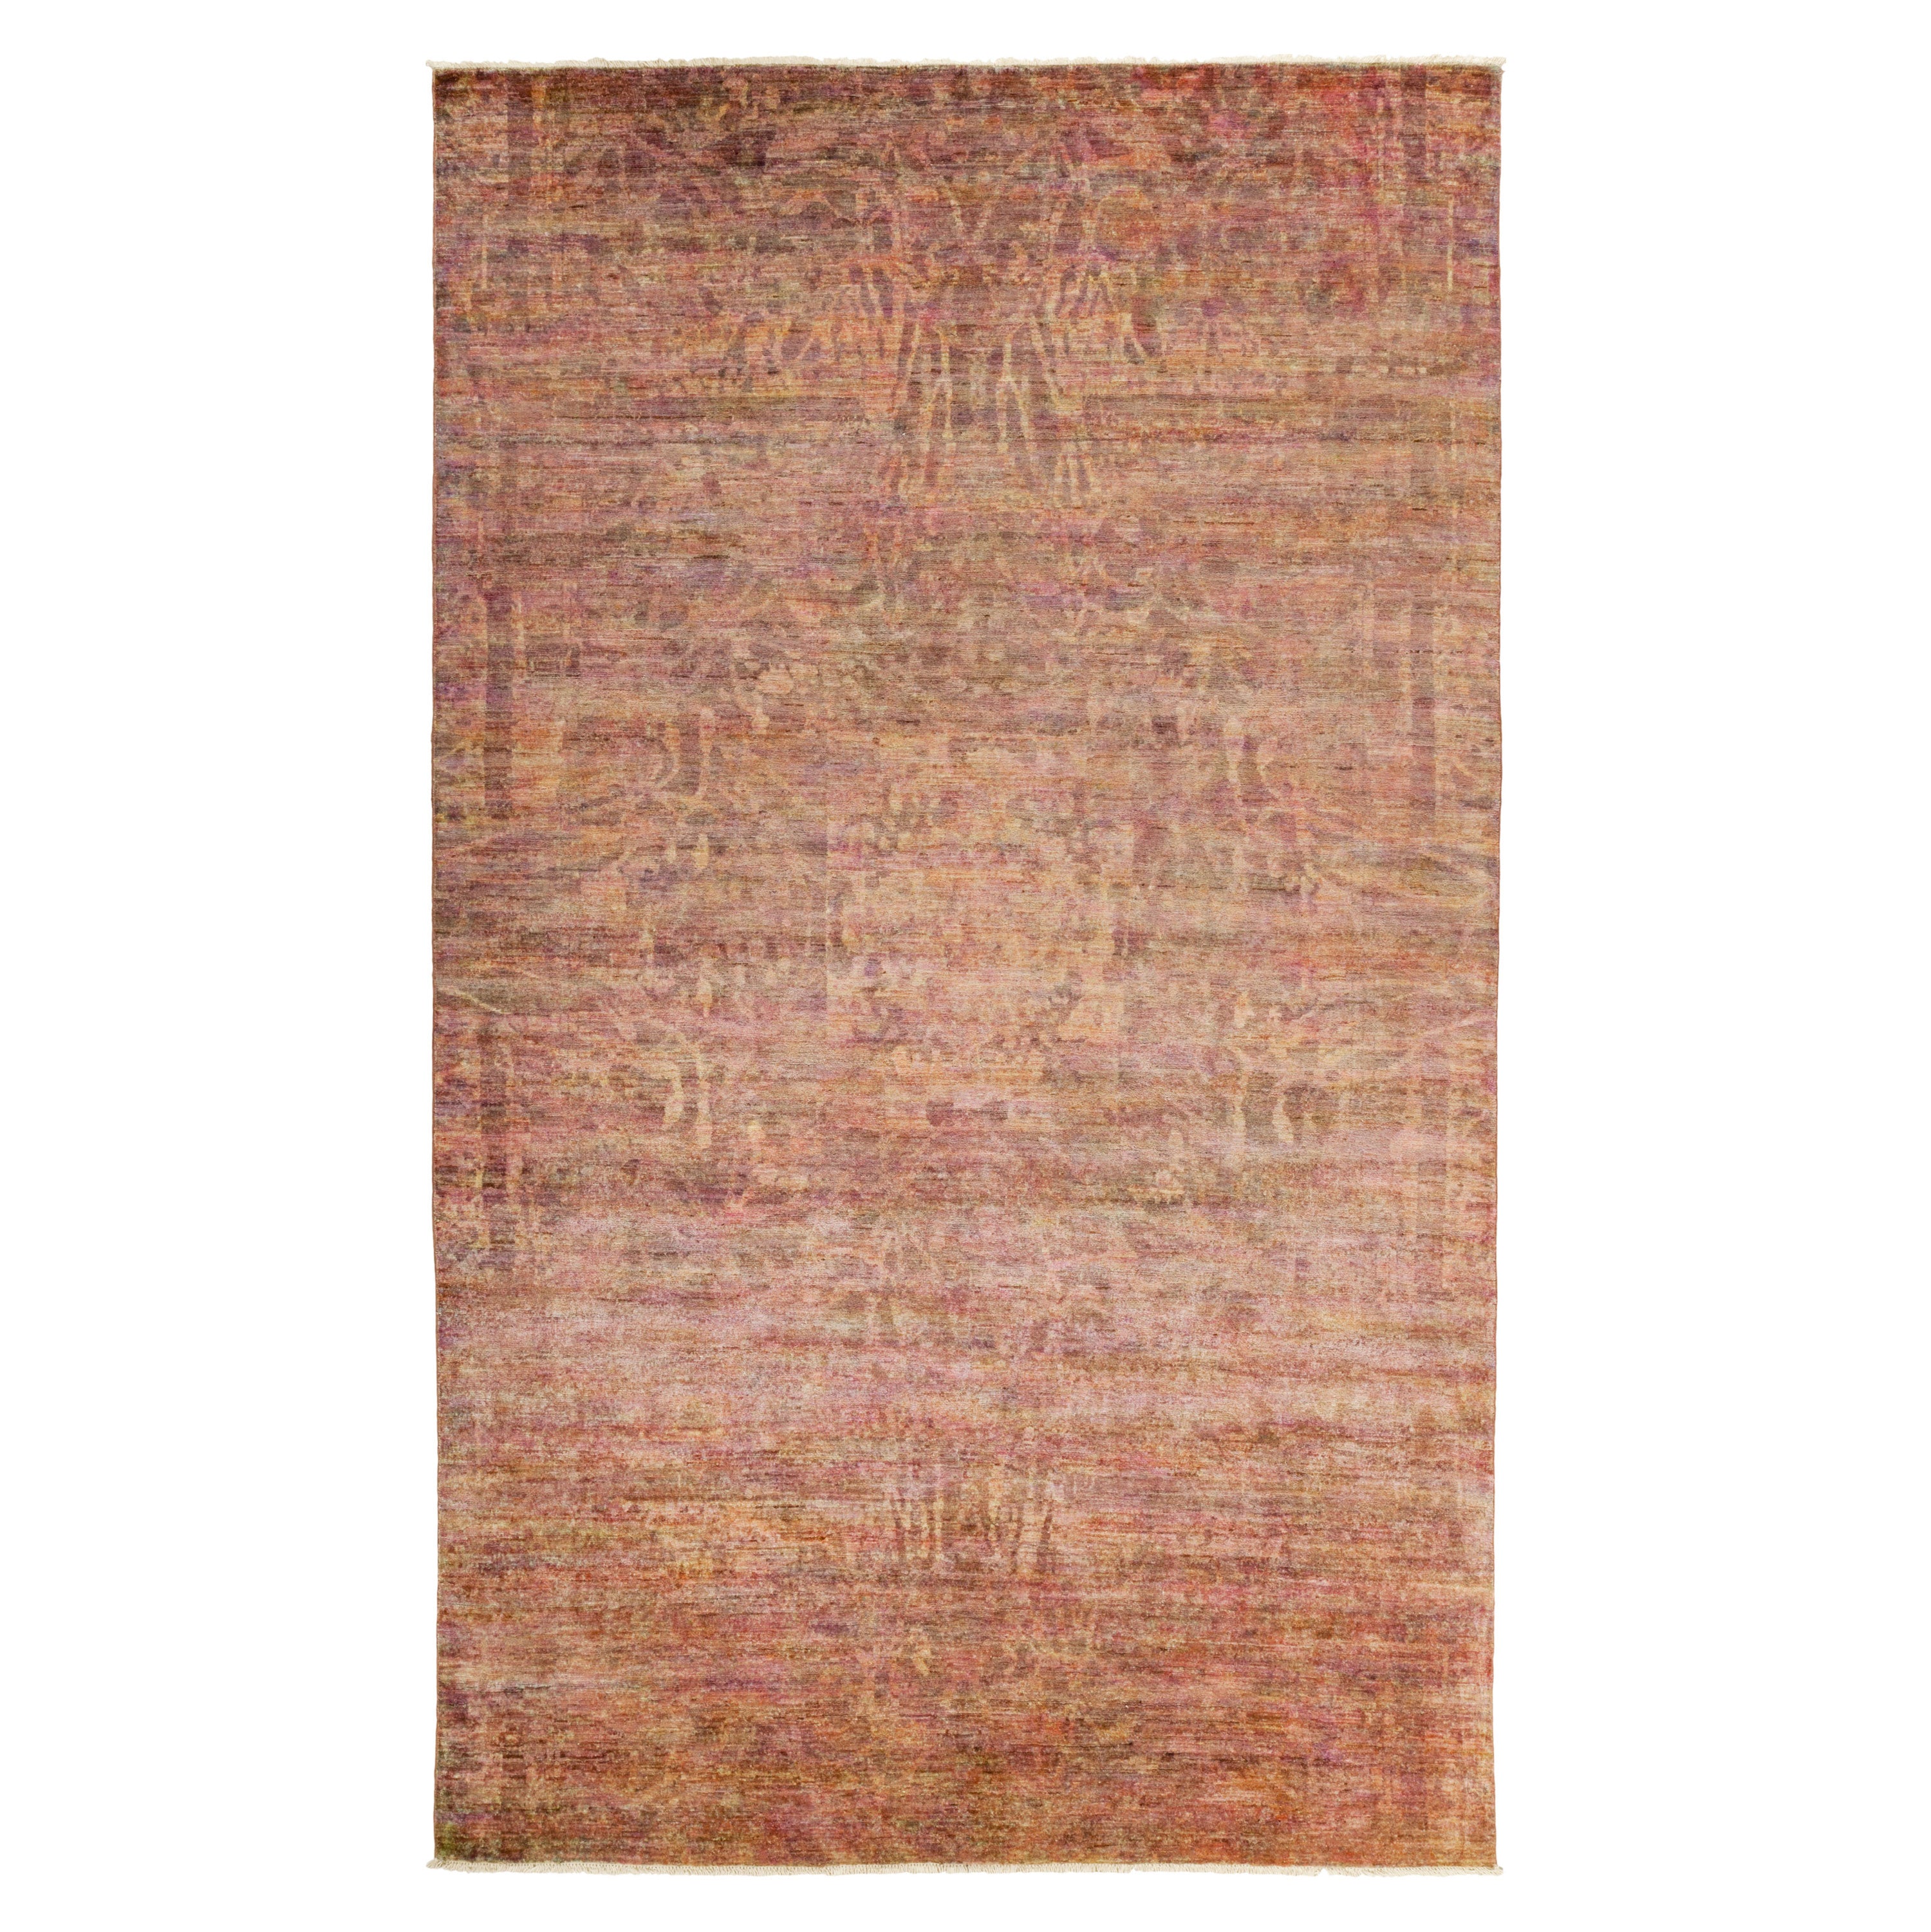 Pink Distressed Overdyed Rug - 6' x 10'